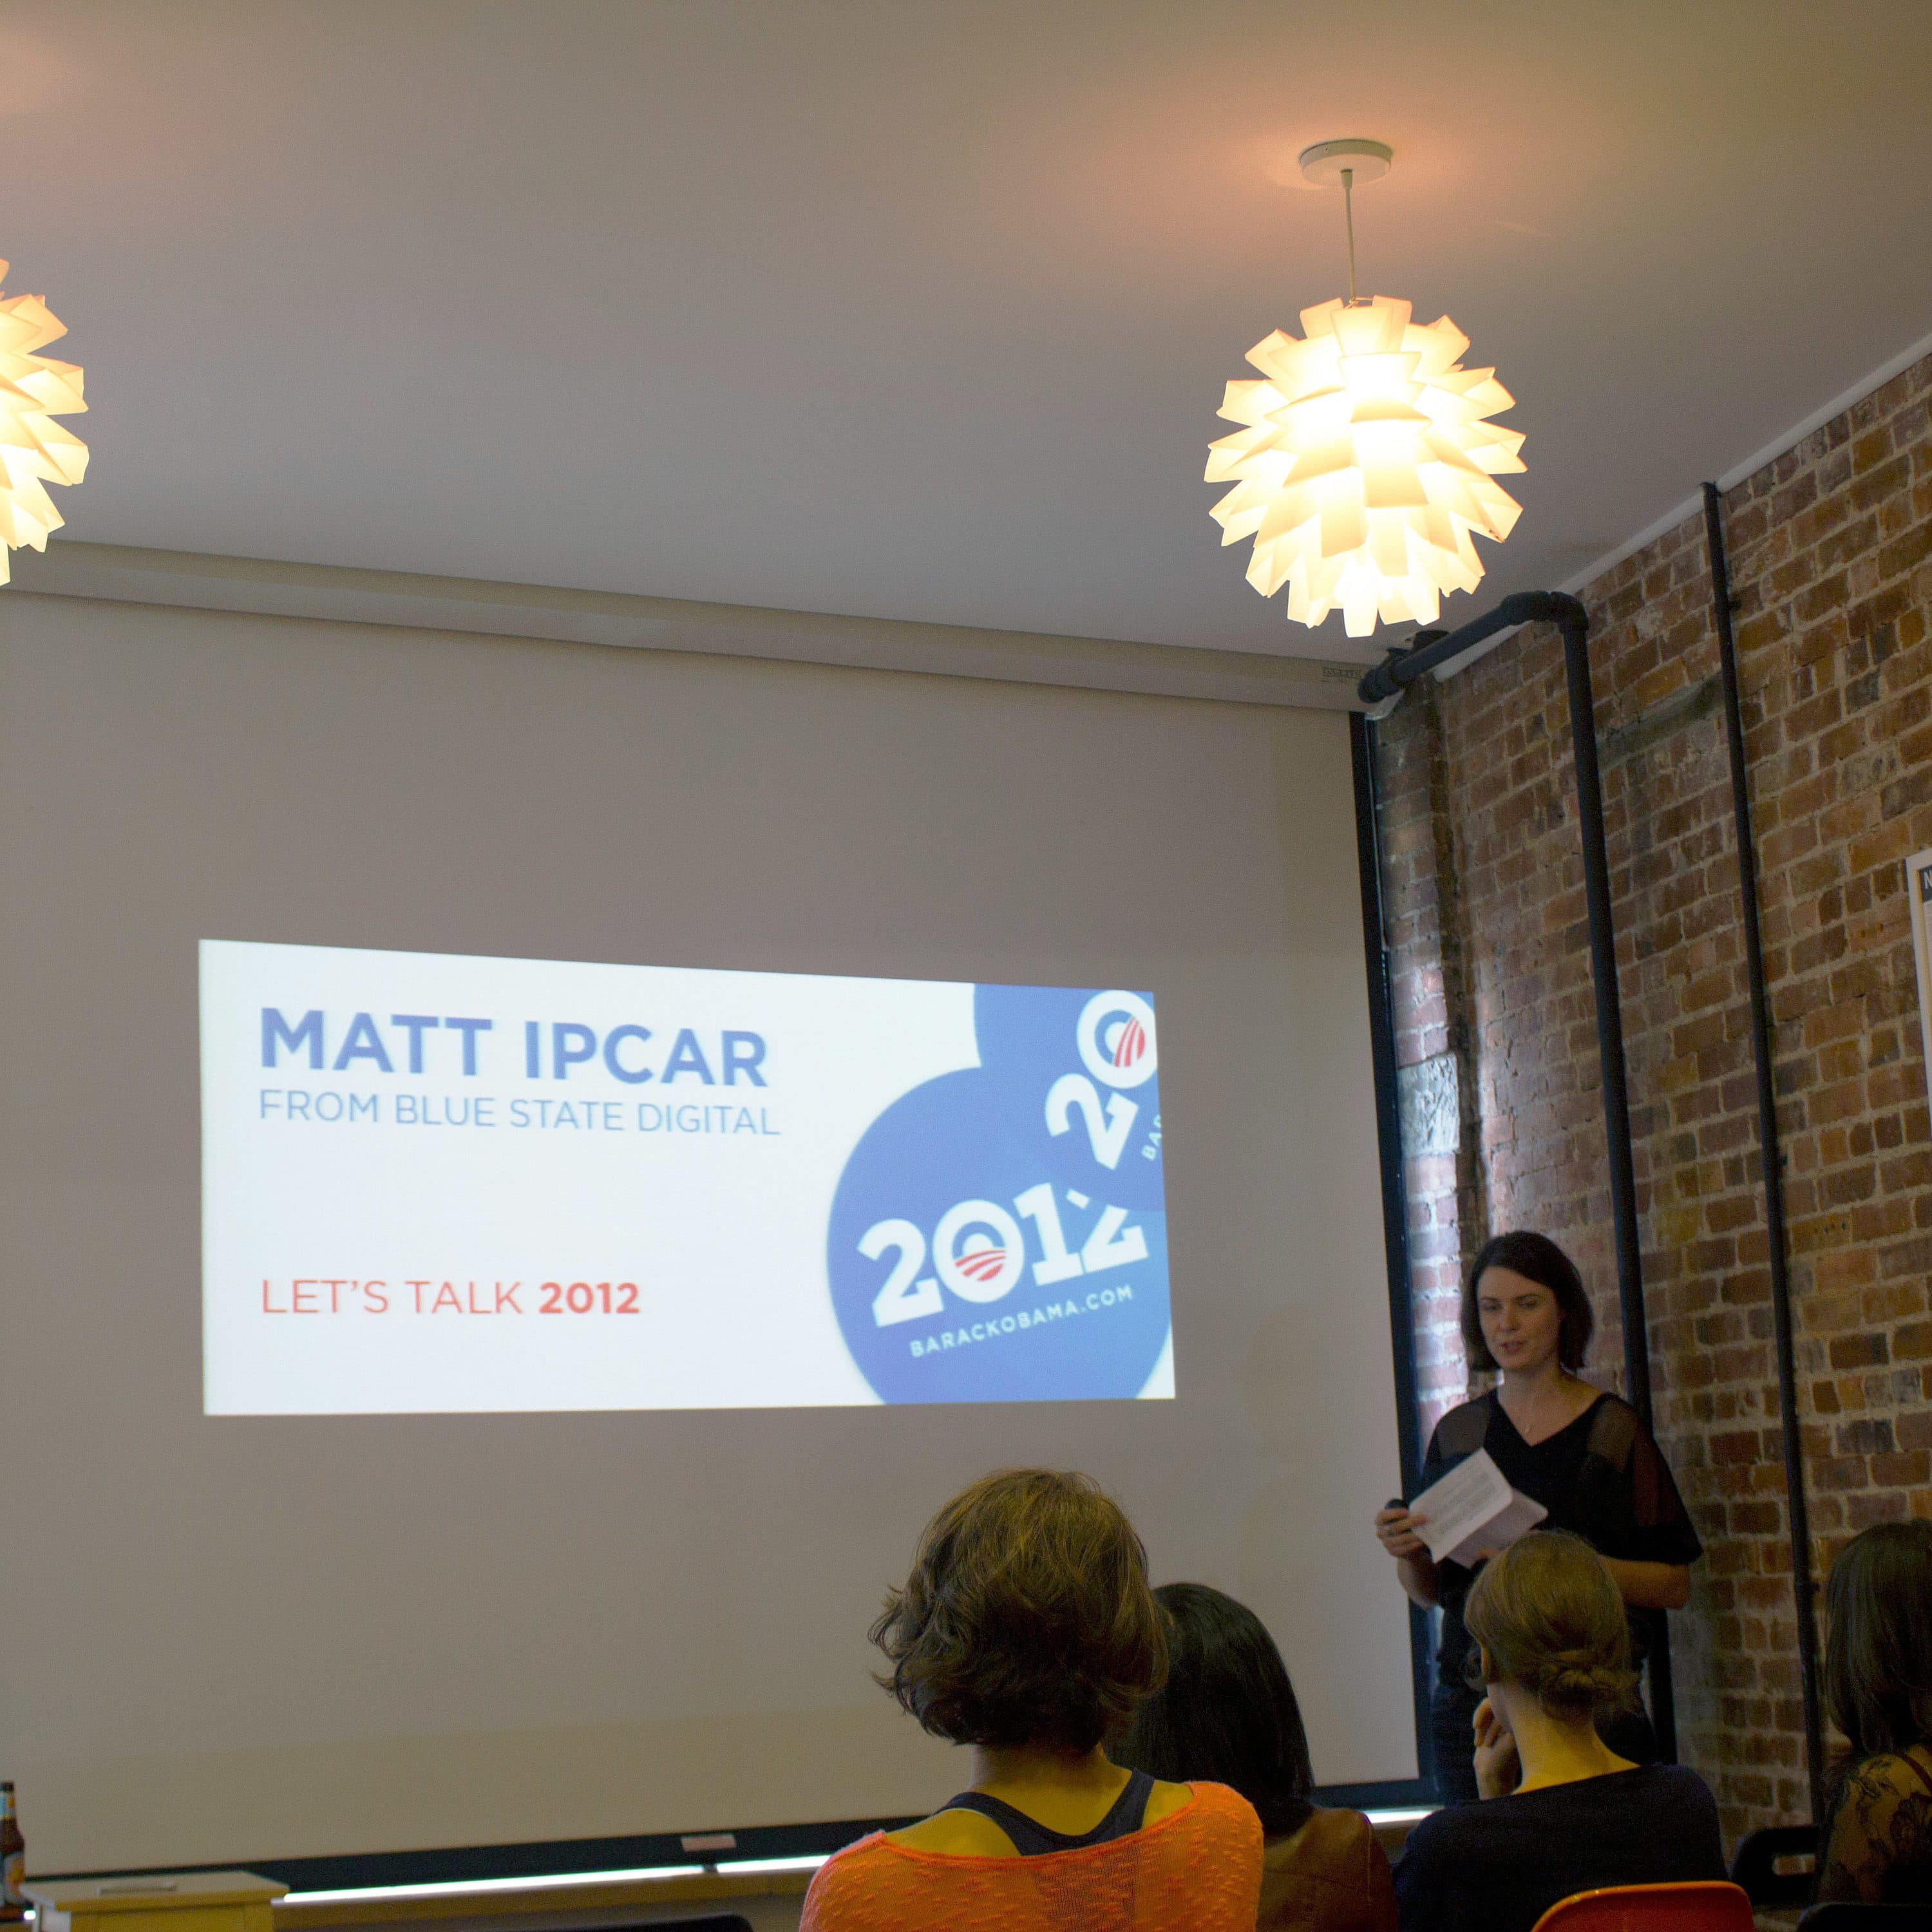 A man and a woman are presenting in front of an audience. The woman is holding a paper, while the man stands beside a projection screen that displays the text, "Matt Ipcar from Blue State Digital, Let's Talk 2012." The room has brick walls and hanging white lights.